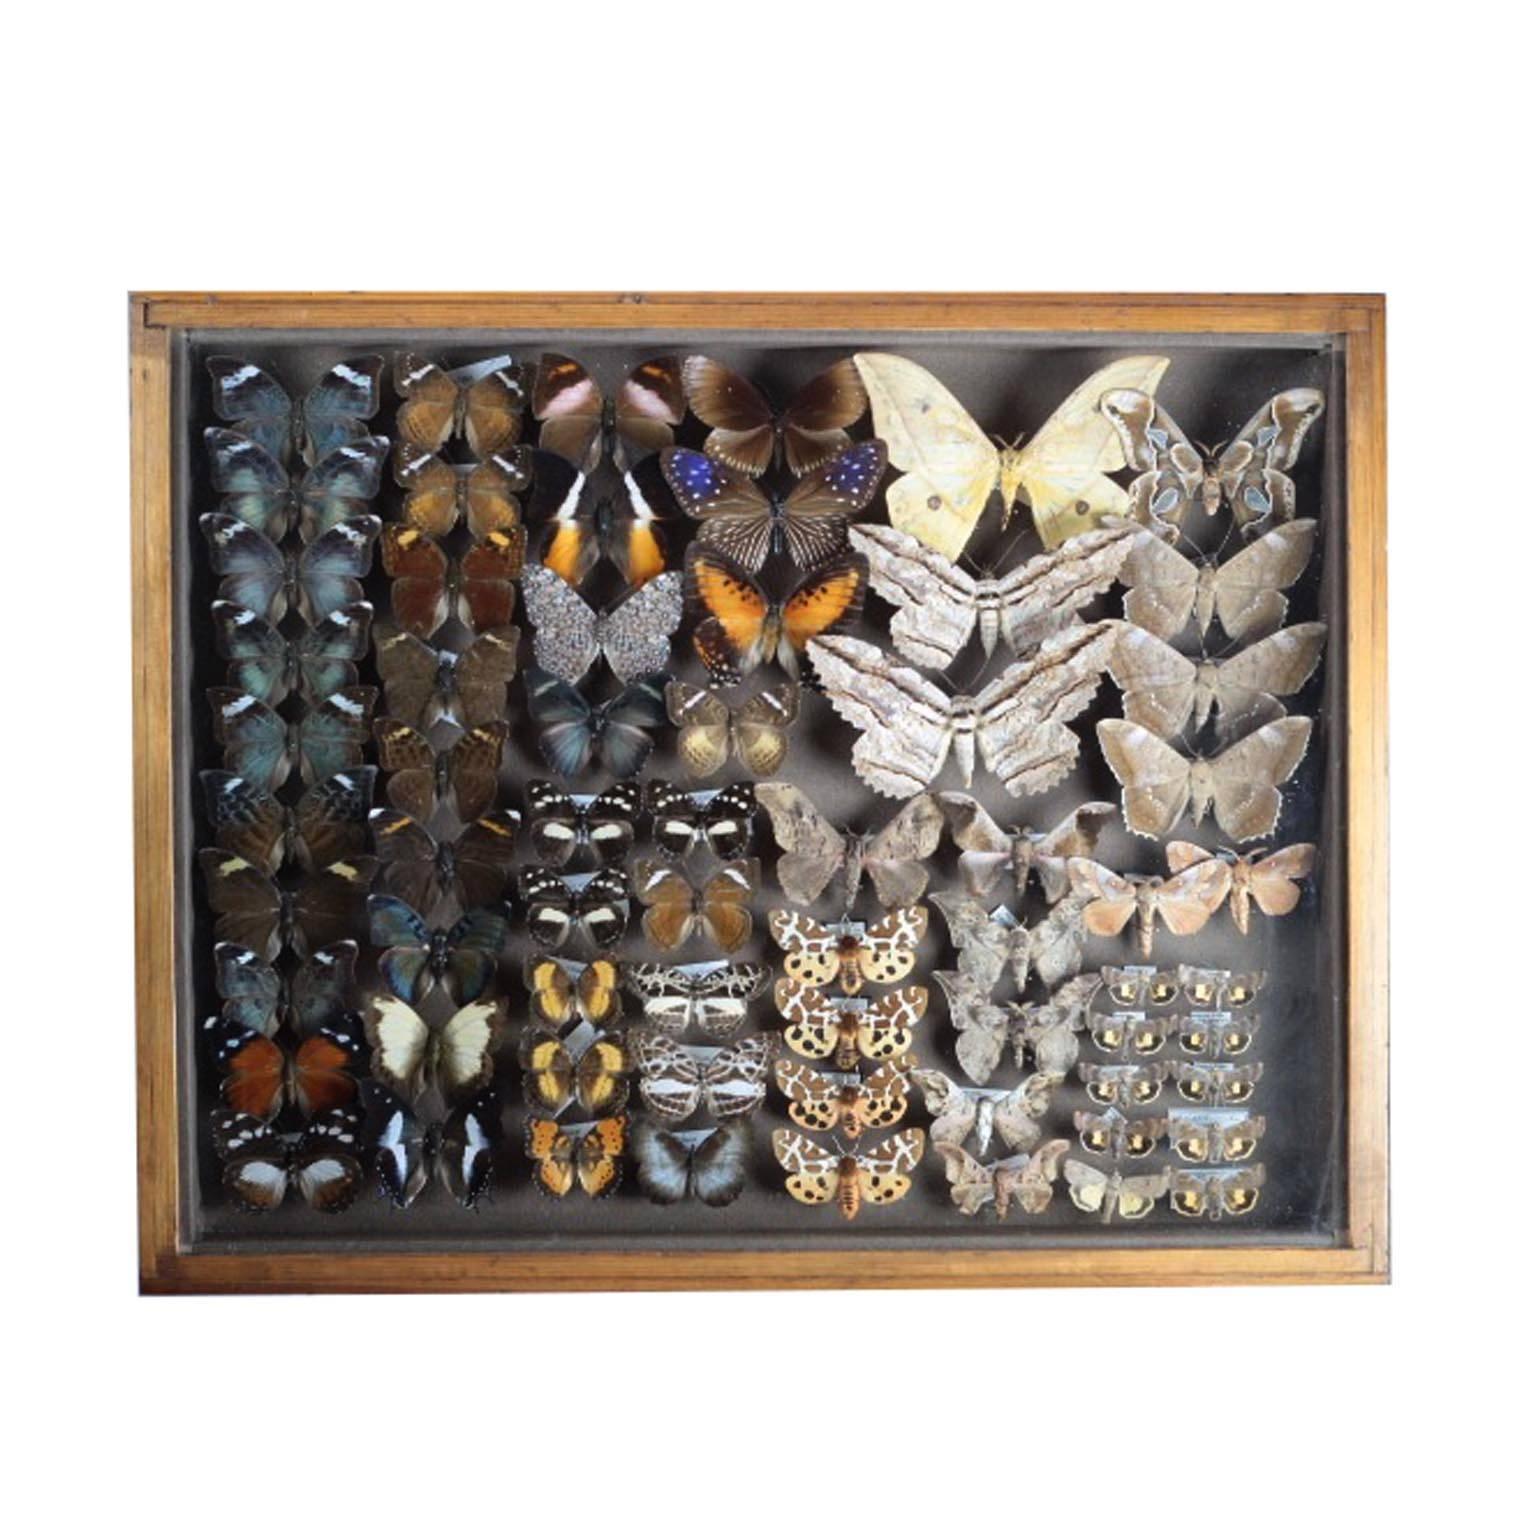 Three antique collector's cases from Belgium filled with European and tropical butterflies and moths. Each specimen is listed with it's collection data and species name, circa 1968-2005. Acquired from a museum collection in Belgium. 
Each is